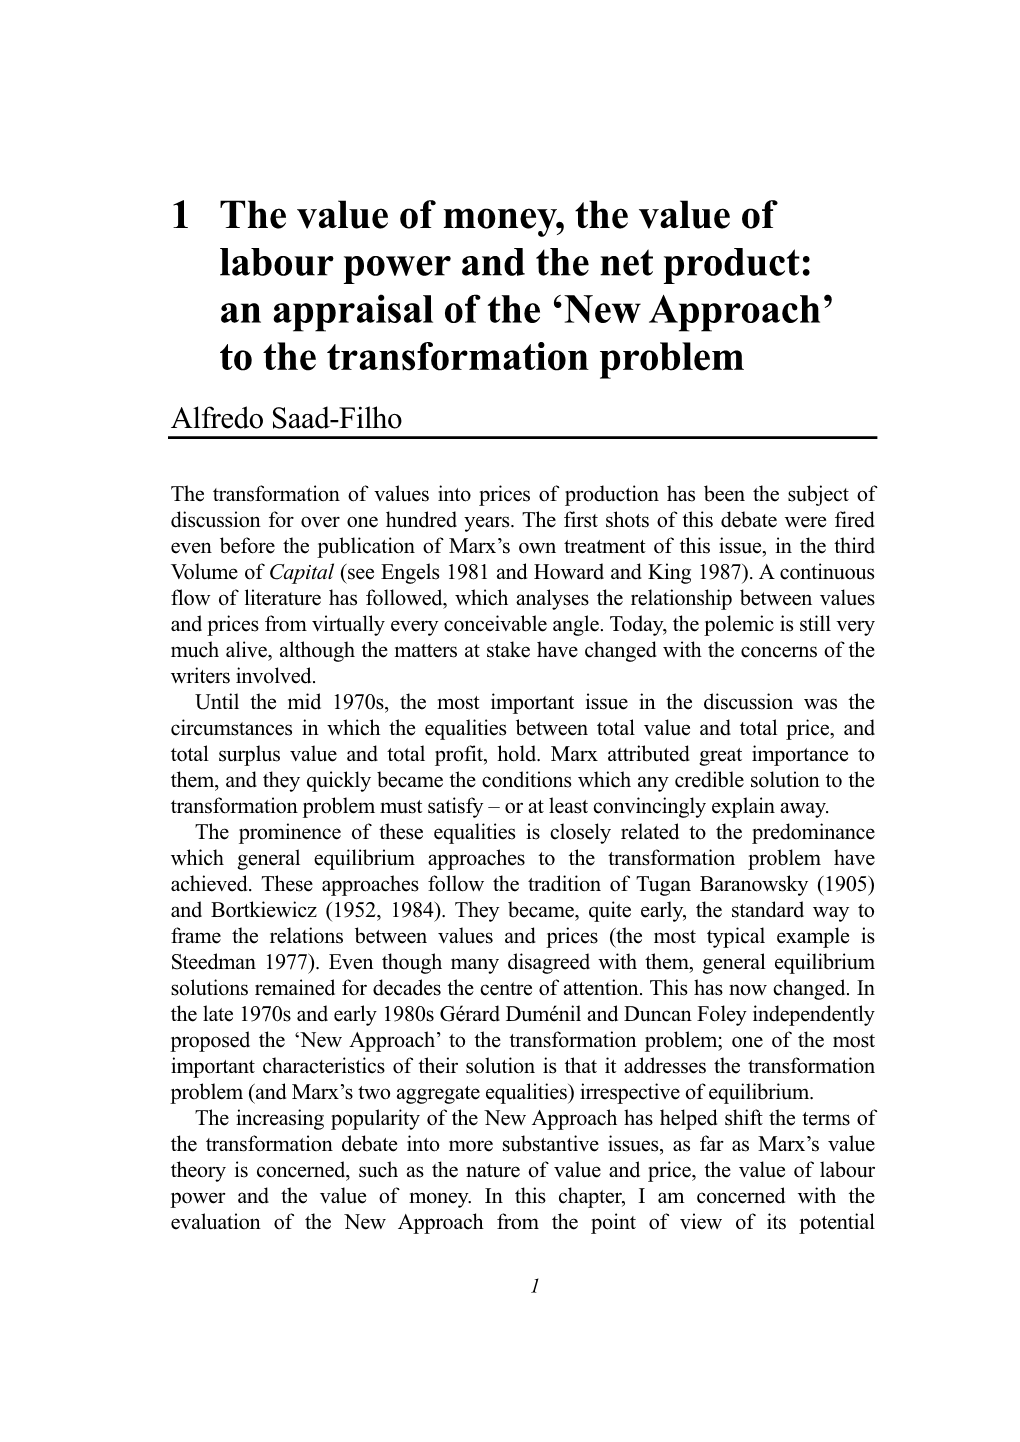 The Value of Money, the Value of Labour Power and the Net Product: an Appraisal of the ‘New Approach’ to the Transformation Problem Alfredo Saad-Filho